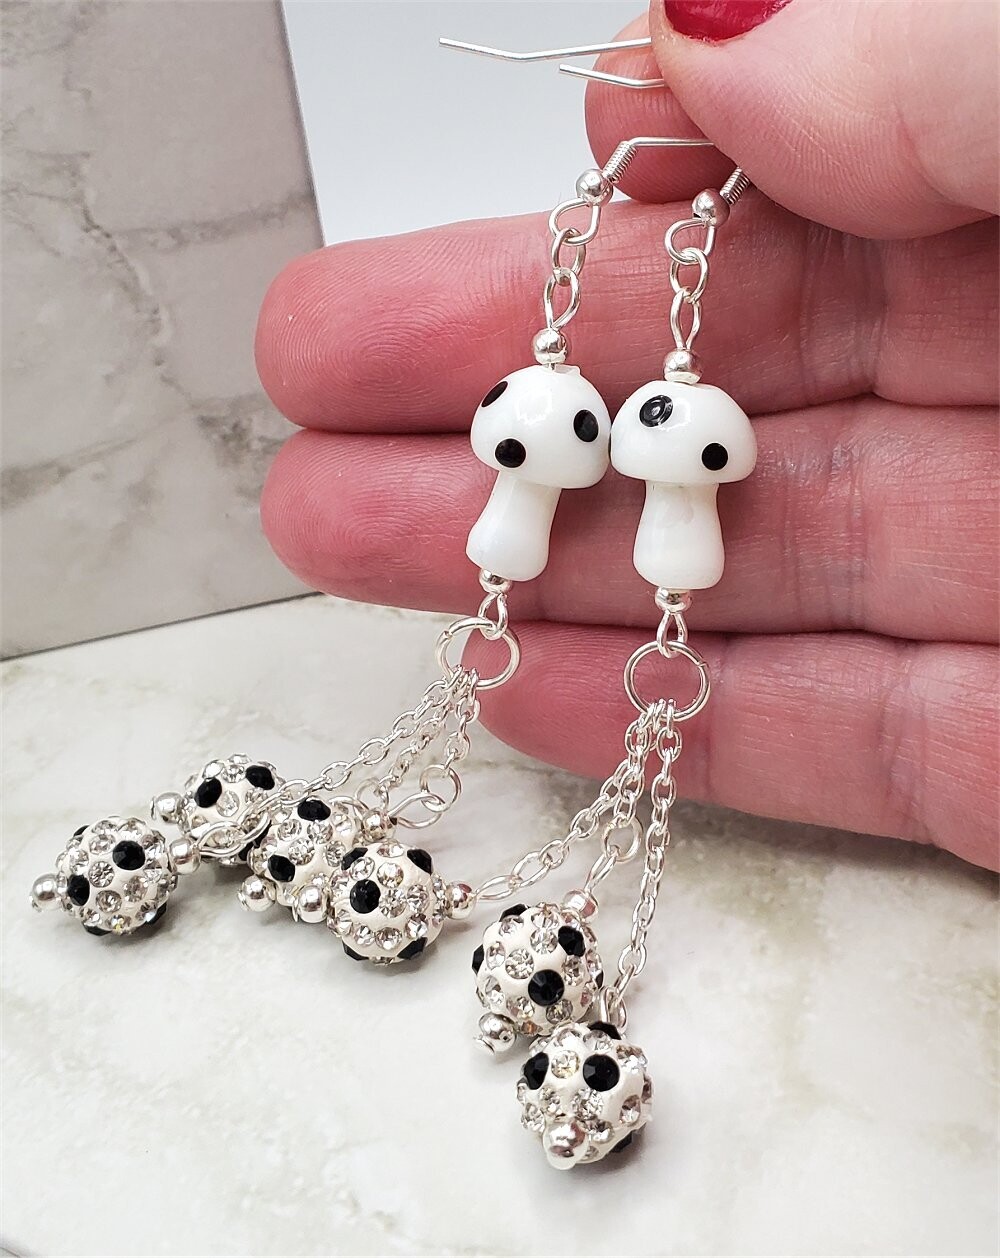 Lampwork Style White Cap Mushroom Glass Bead Earrings with White with Black Polka Dot Pave Beads